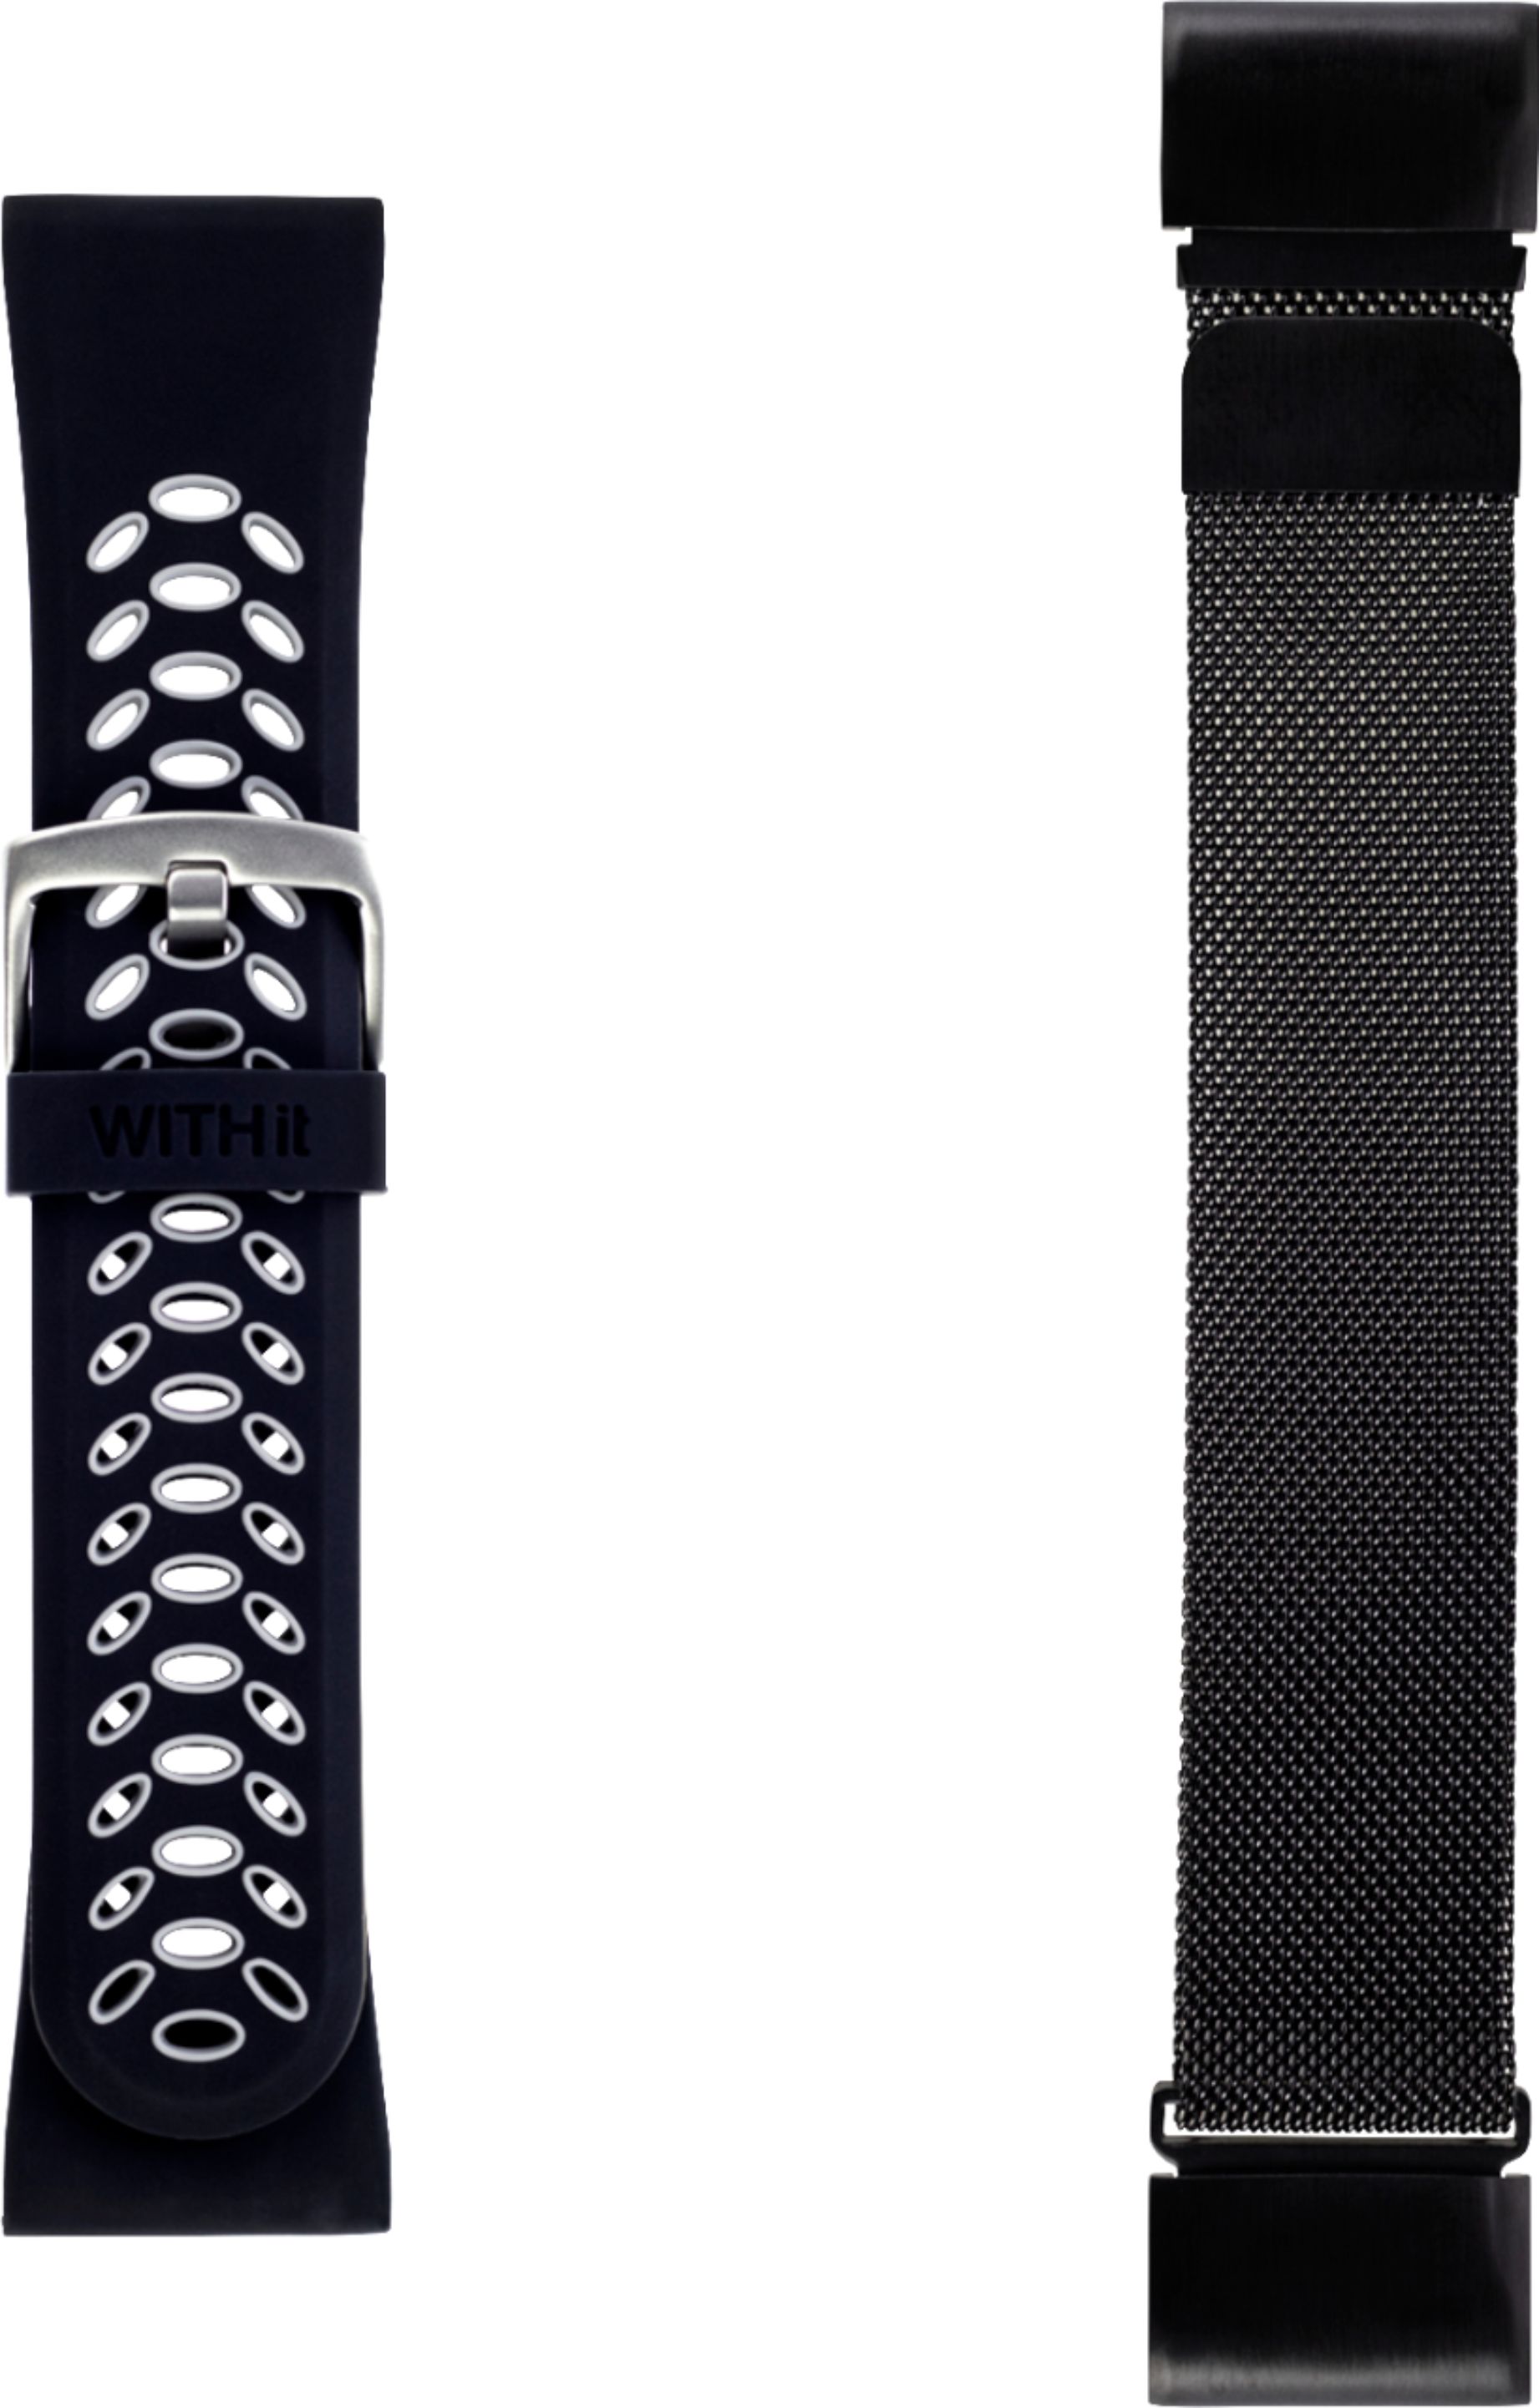 WITHit - 26mm Watch Bands for Garmin fēnix 5X and 5X Plus (2-Pack) - Black/Gray Sport & Black Mesh